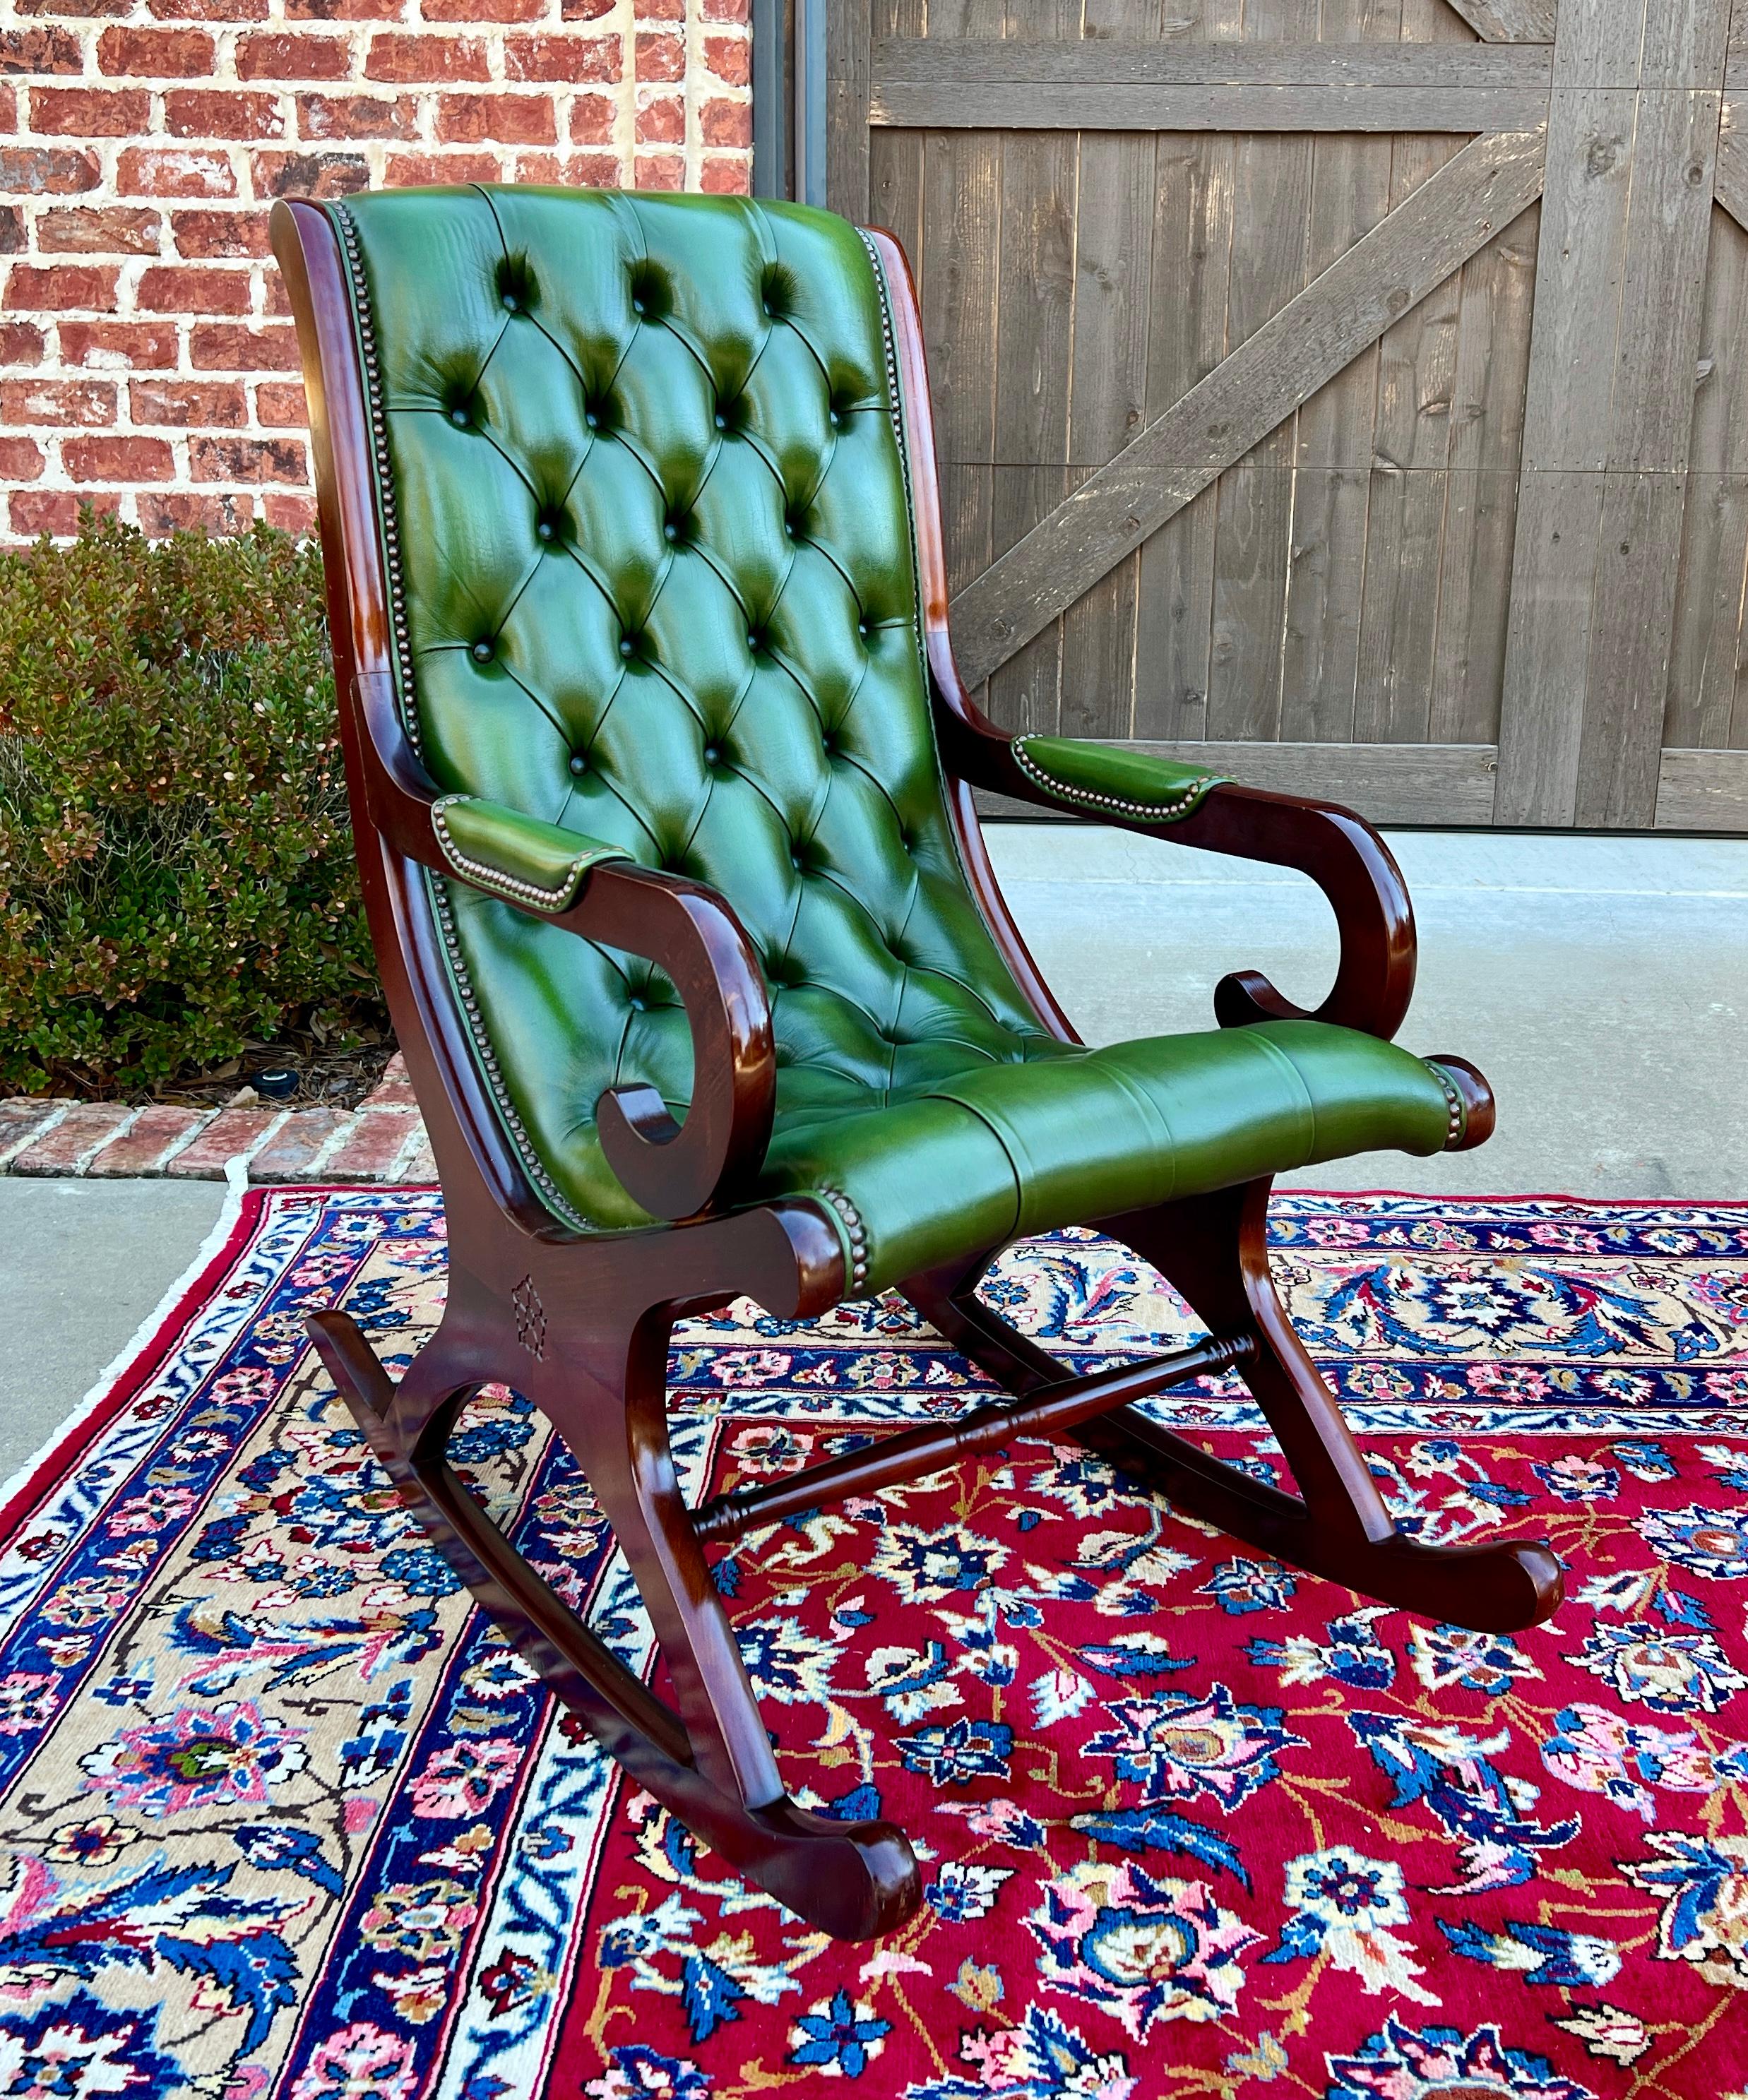 TIMELESS Vintage Mid-Century English Green Leather Tufted Seat CHESTERFIELD Rocking Chair

PERFECT ICONIC look for a gentleman's office, study, library, or cigar lounge~~upholstery is green in color~~timeless traditional style!

A commanding